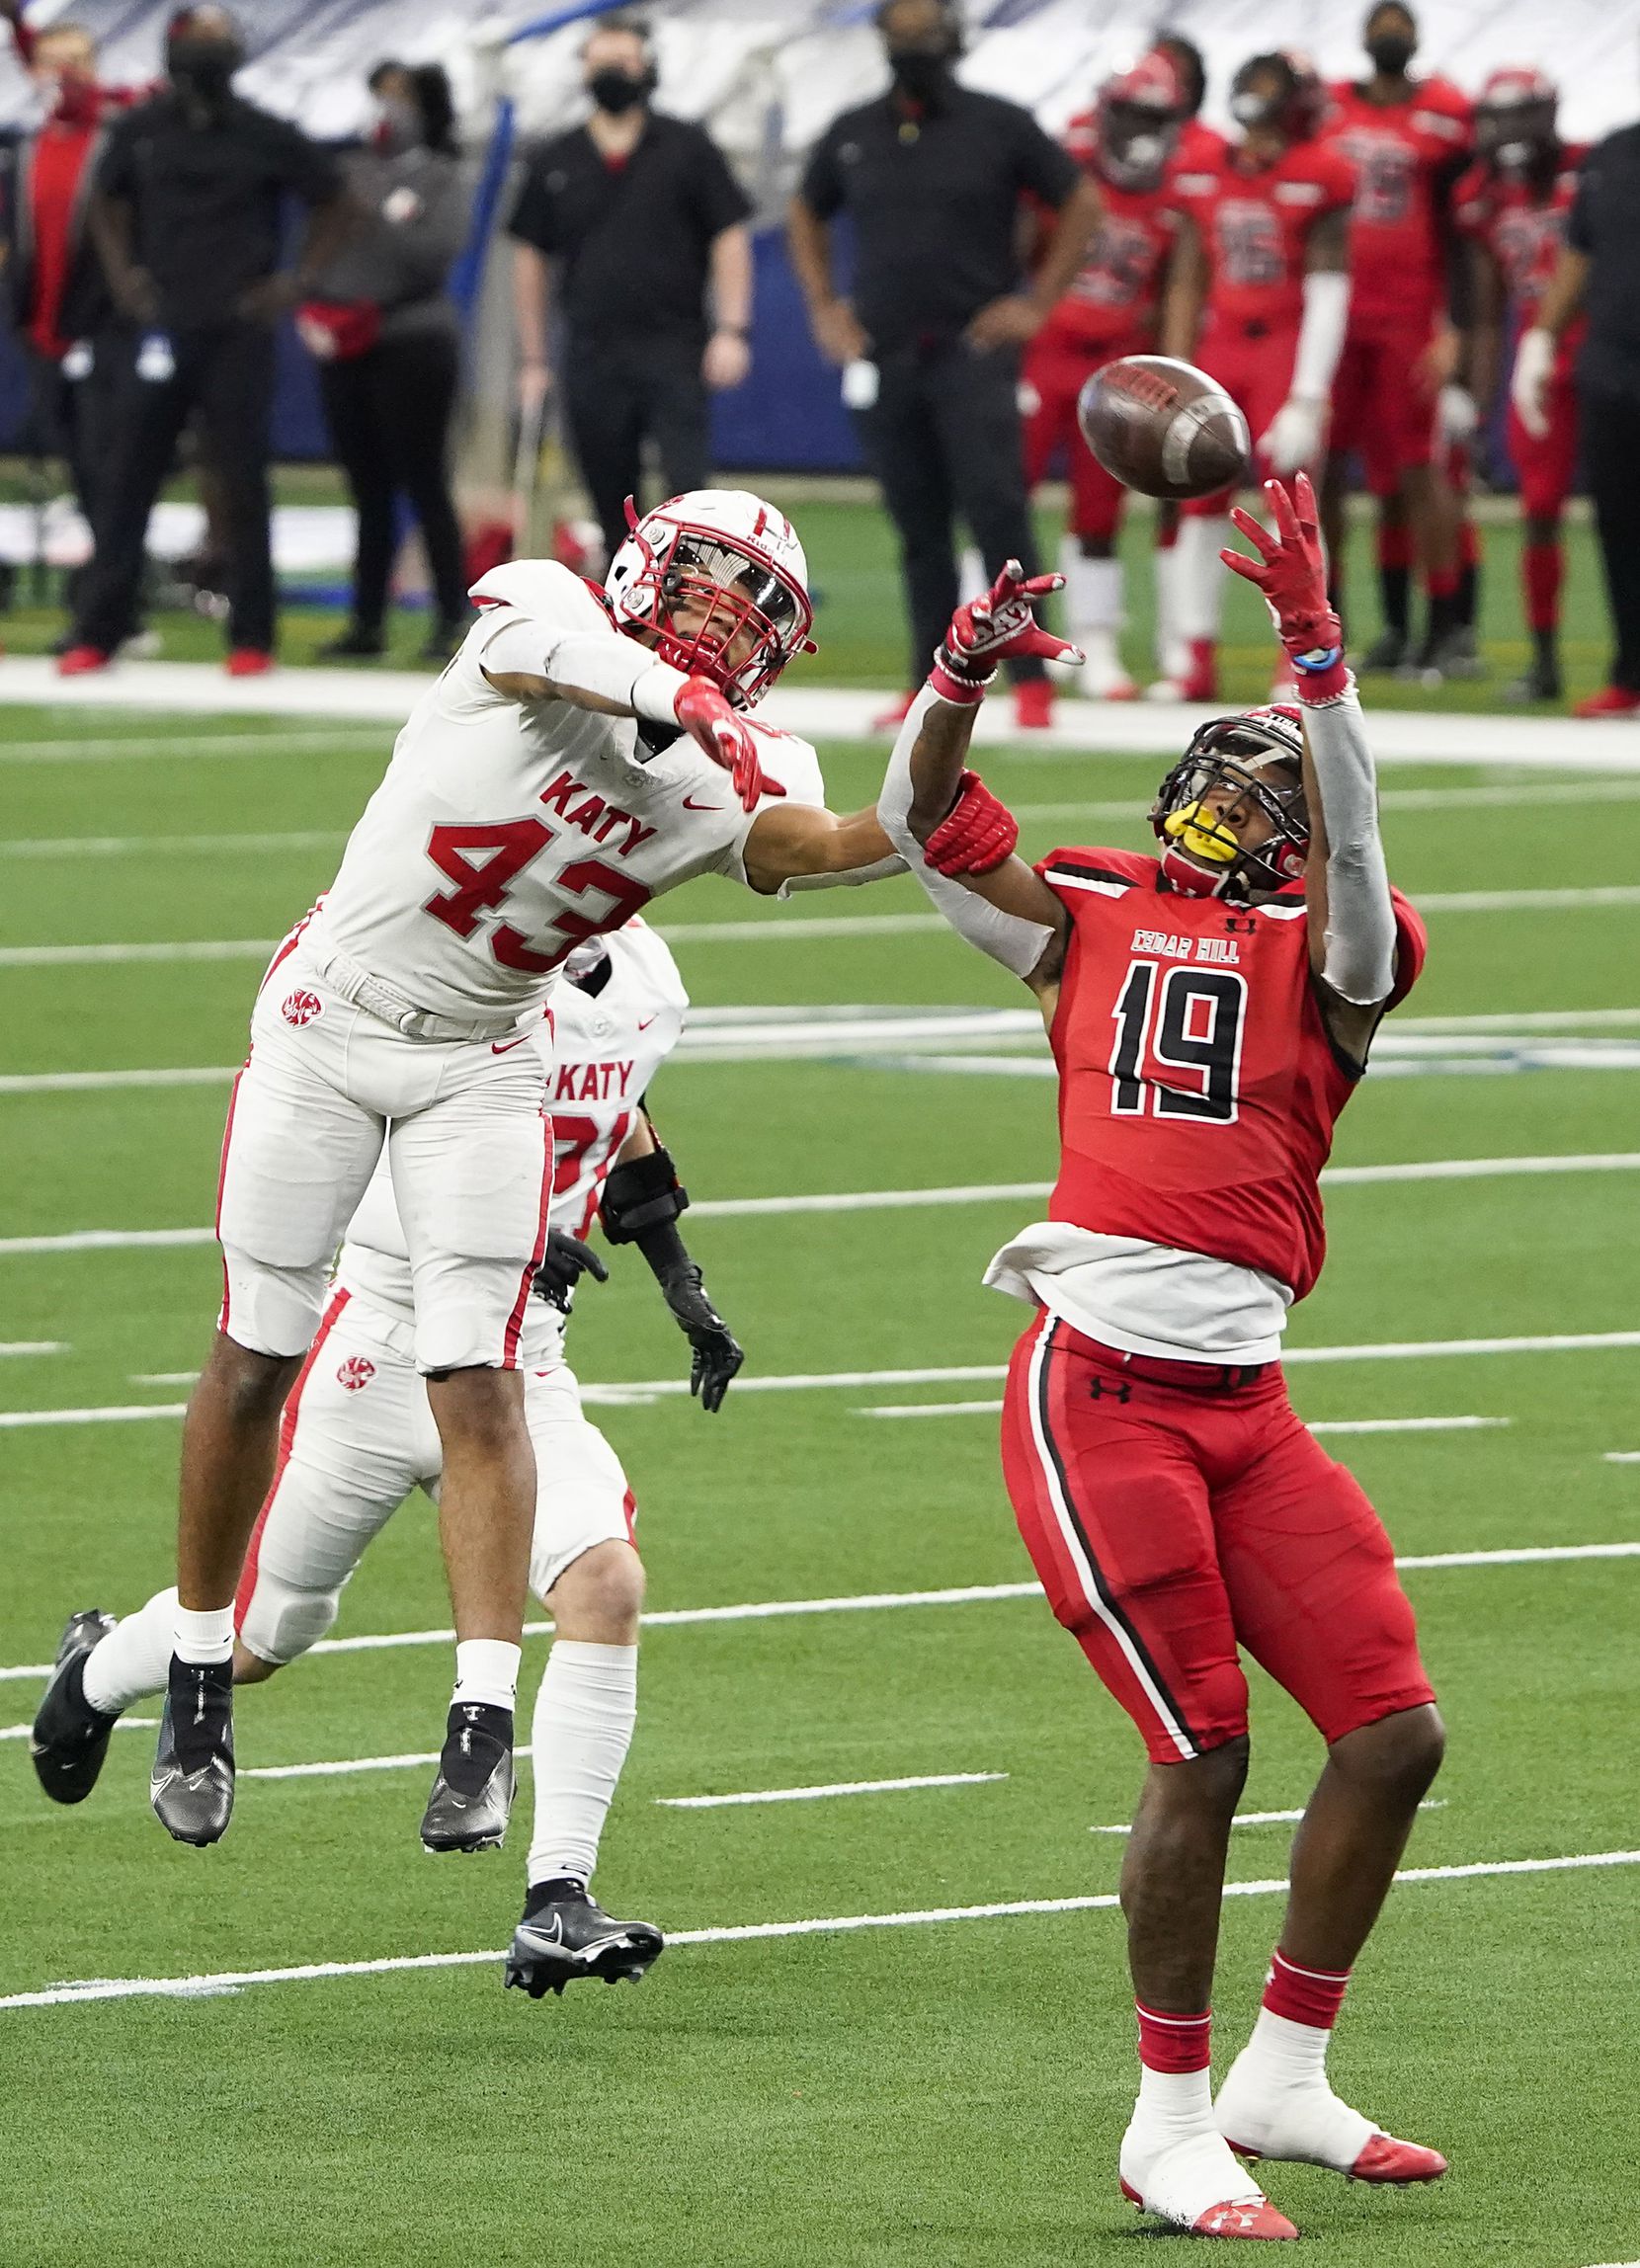 Katy defensive back Dalton Johnson (43) breaks up a pass intended for Cedar Hill wide receiver Earnie Moore (19) during the first half of the Class 6A Division II state football championship game at AT&T Stadium on Saturday, Jan. 16, 2021, in Arlington, Texas.